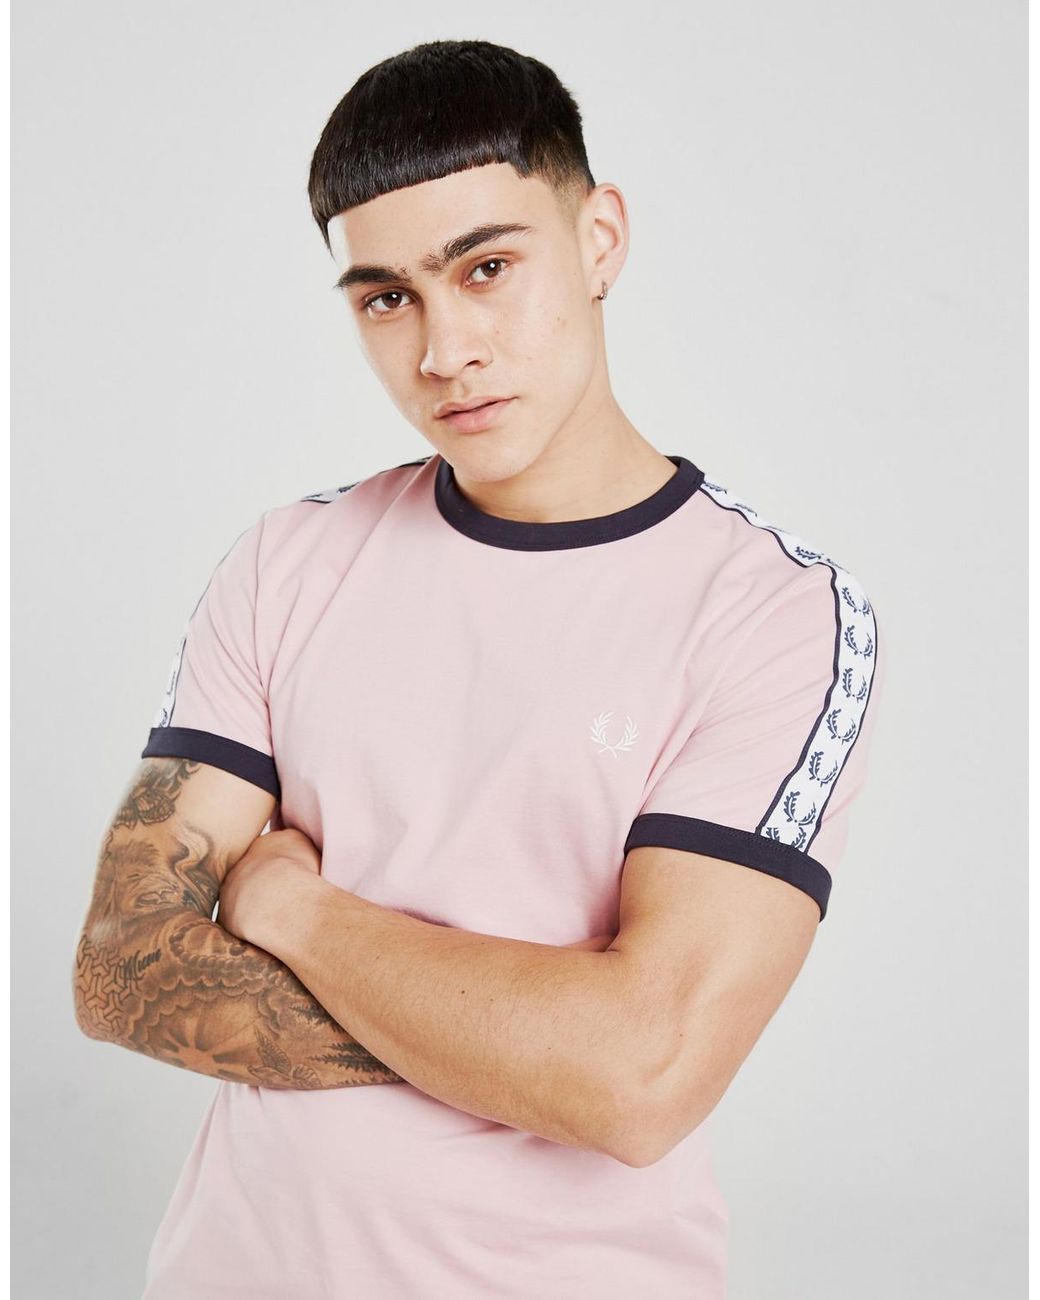 Fred Perry Cotton Taped Ringer T-shirt in Pink for Men - Lyst